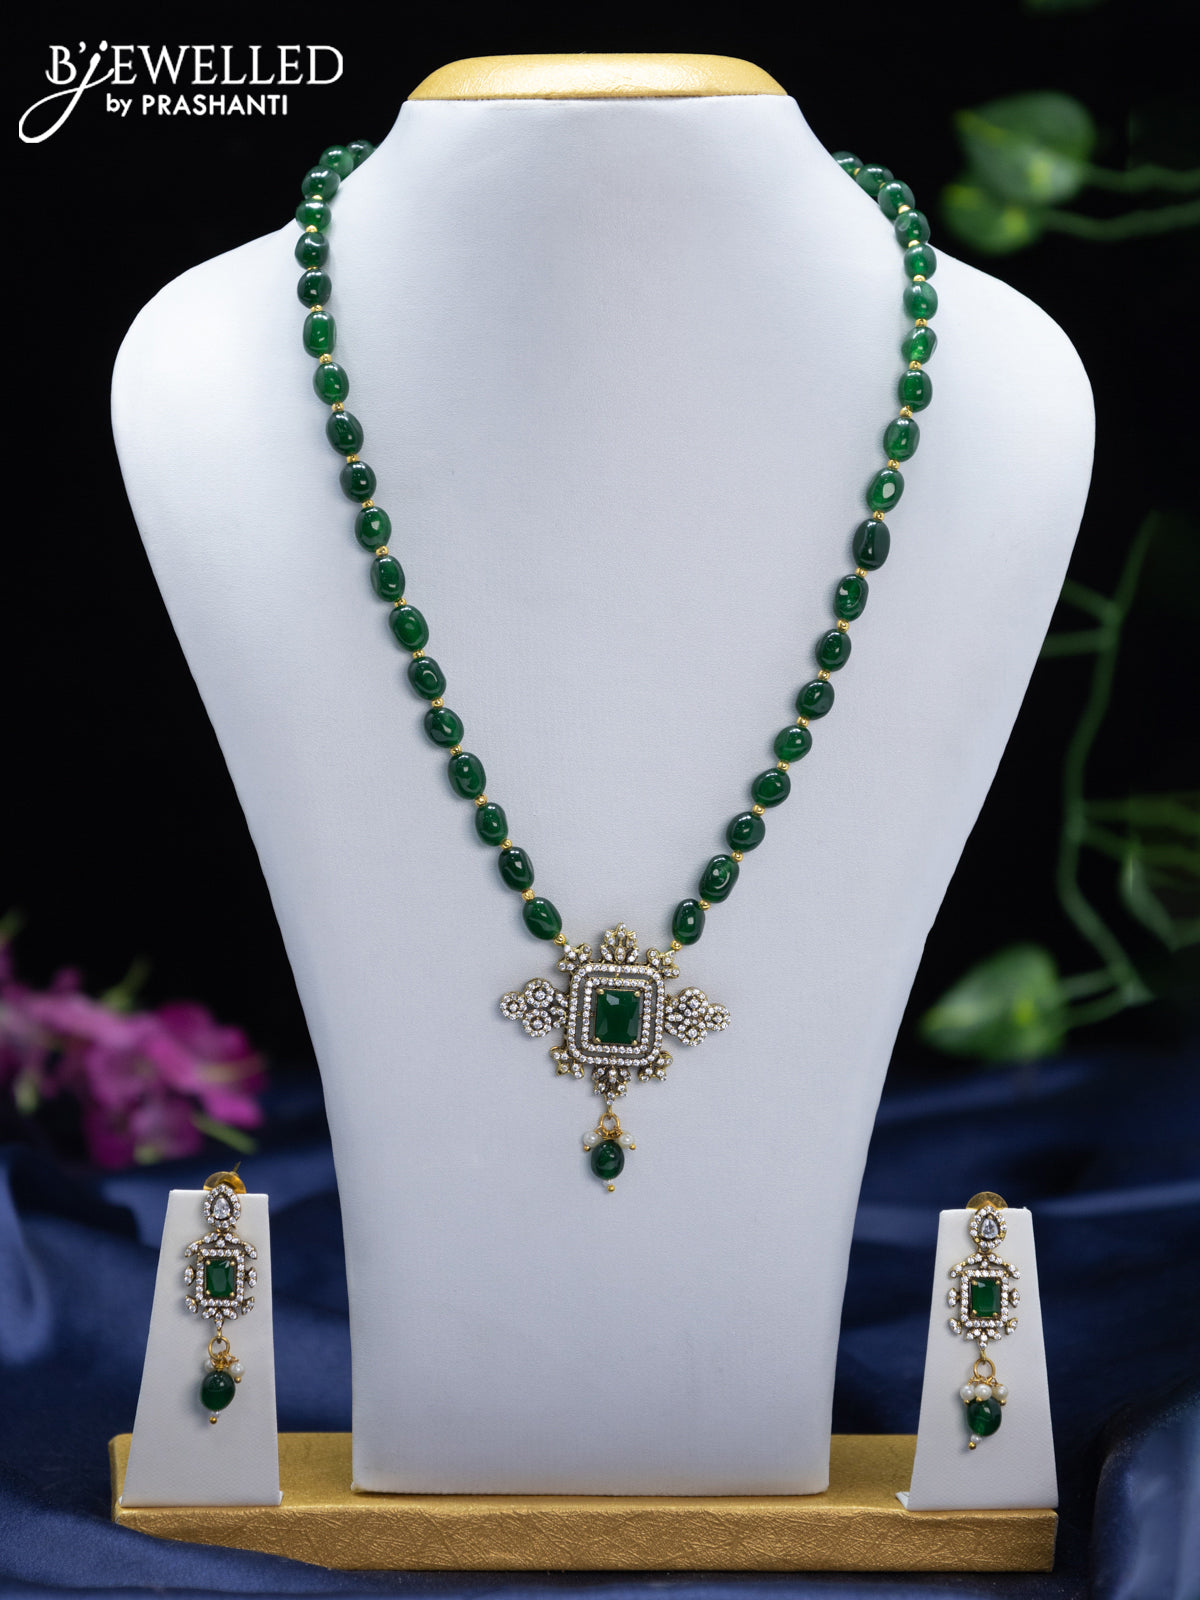 Beaded green necklace with emerald & cz stones and beads hangings in victorian finish